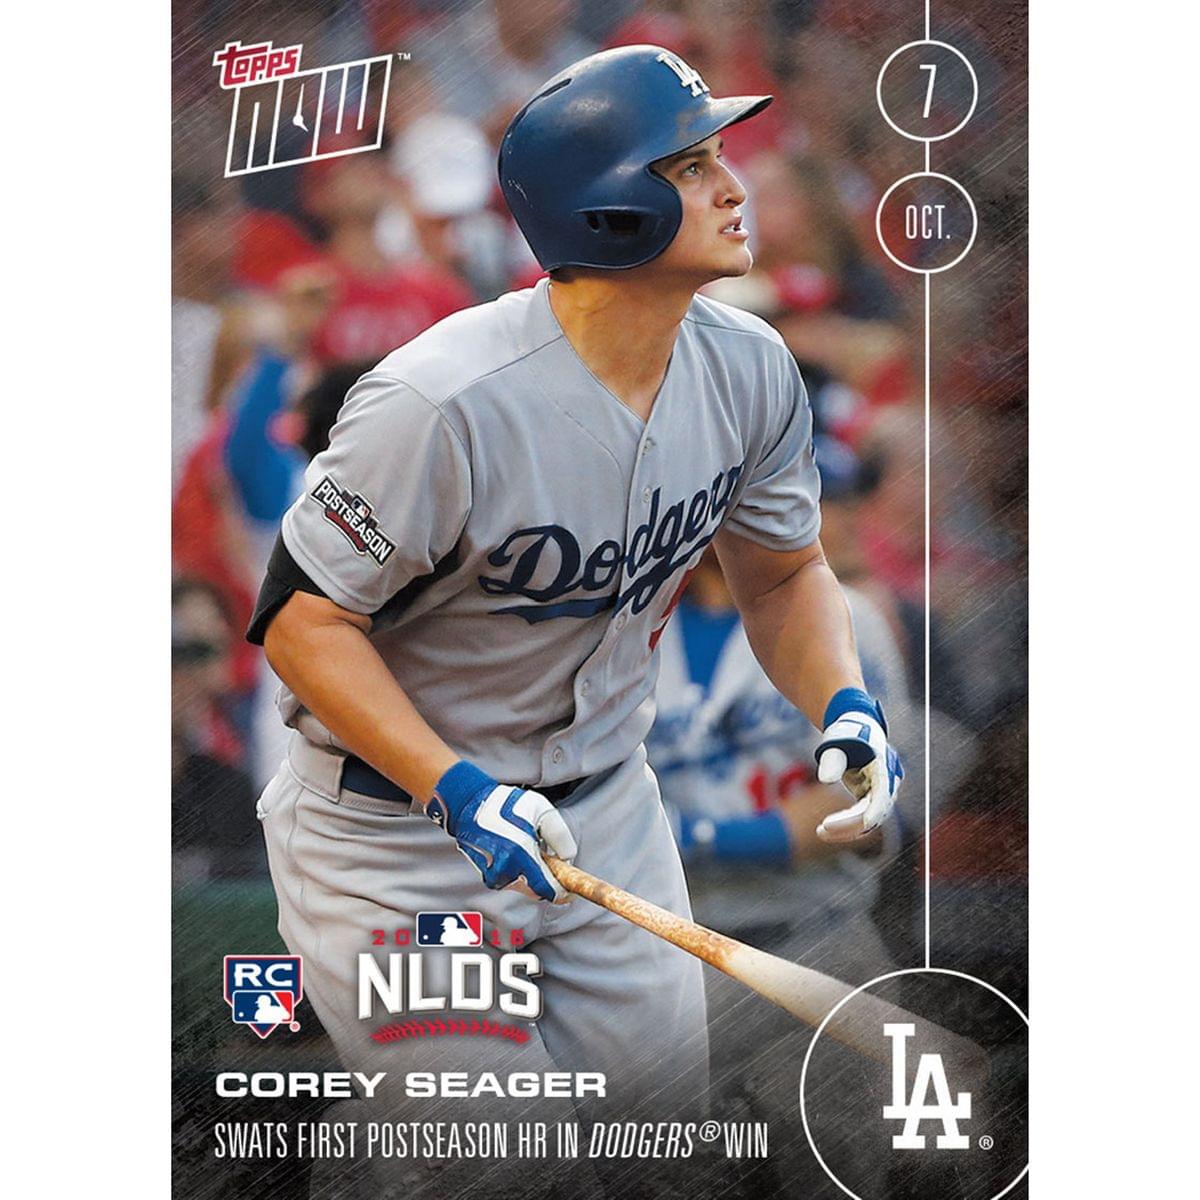 MLB LA Dodgers Corey Seager (RC) #551 2016 Topps NOW Trading Card